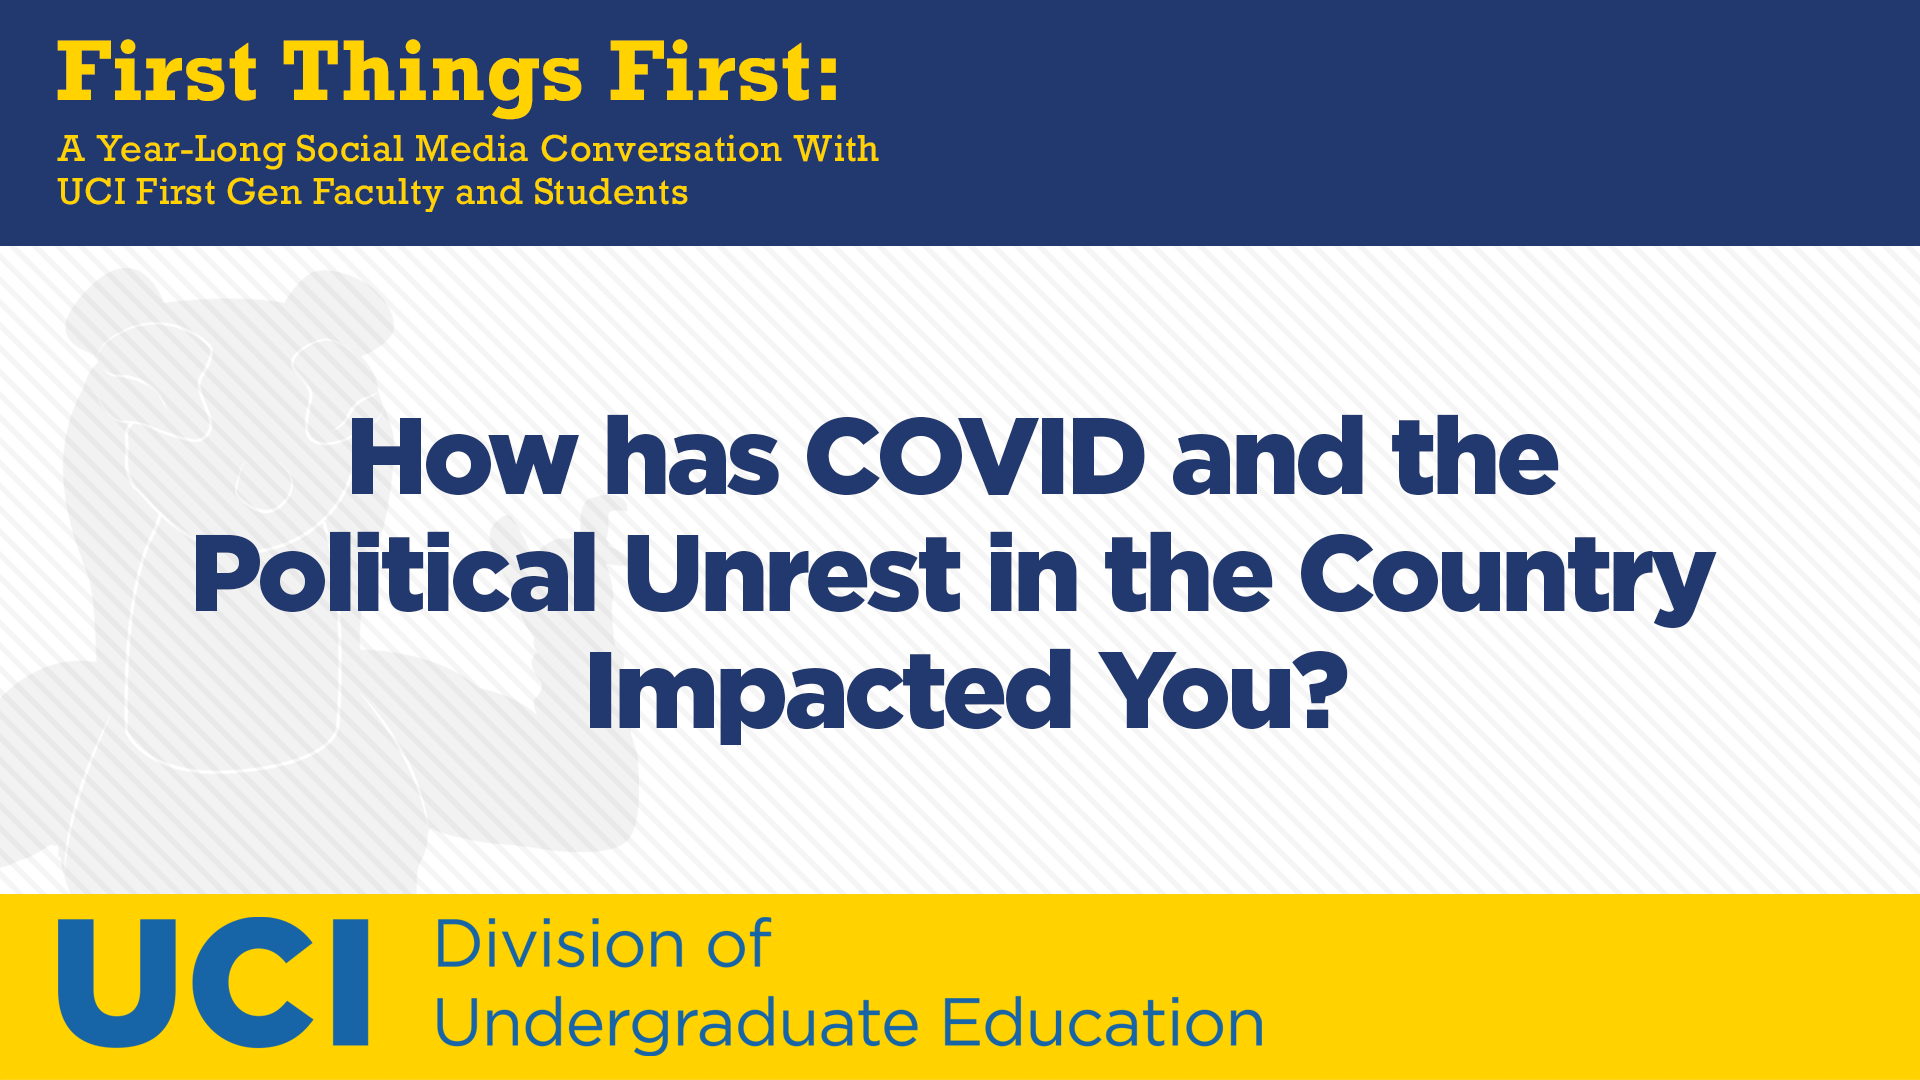 How has COVID and the Political Unrest in the Country Impacted You?